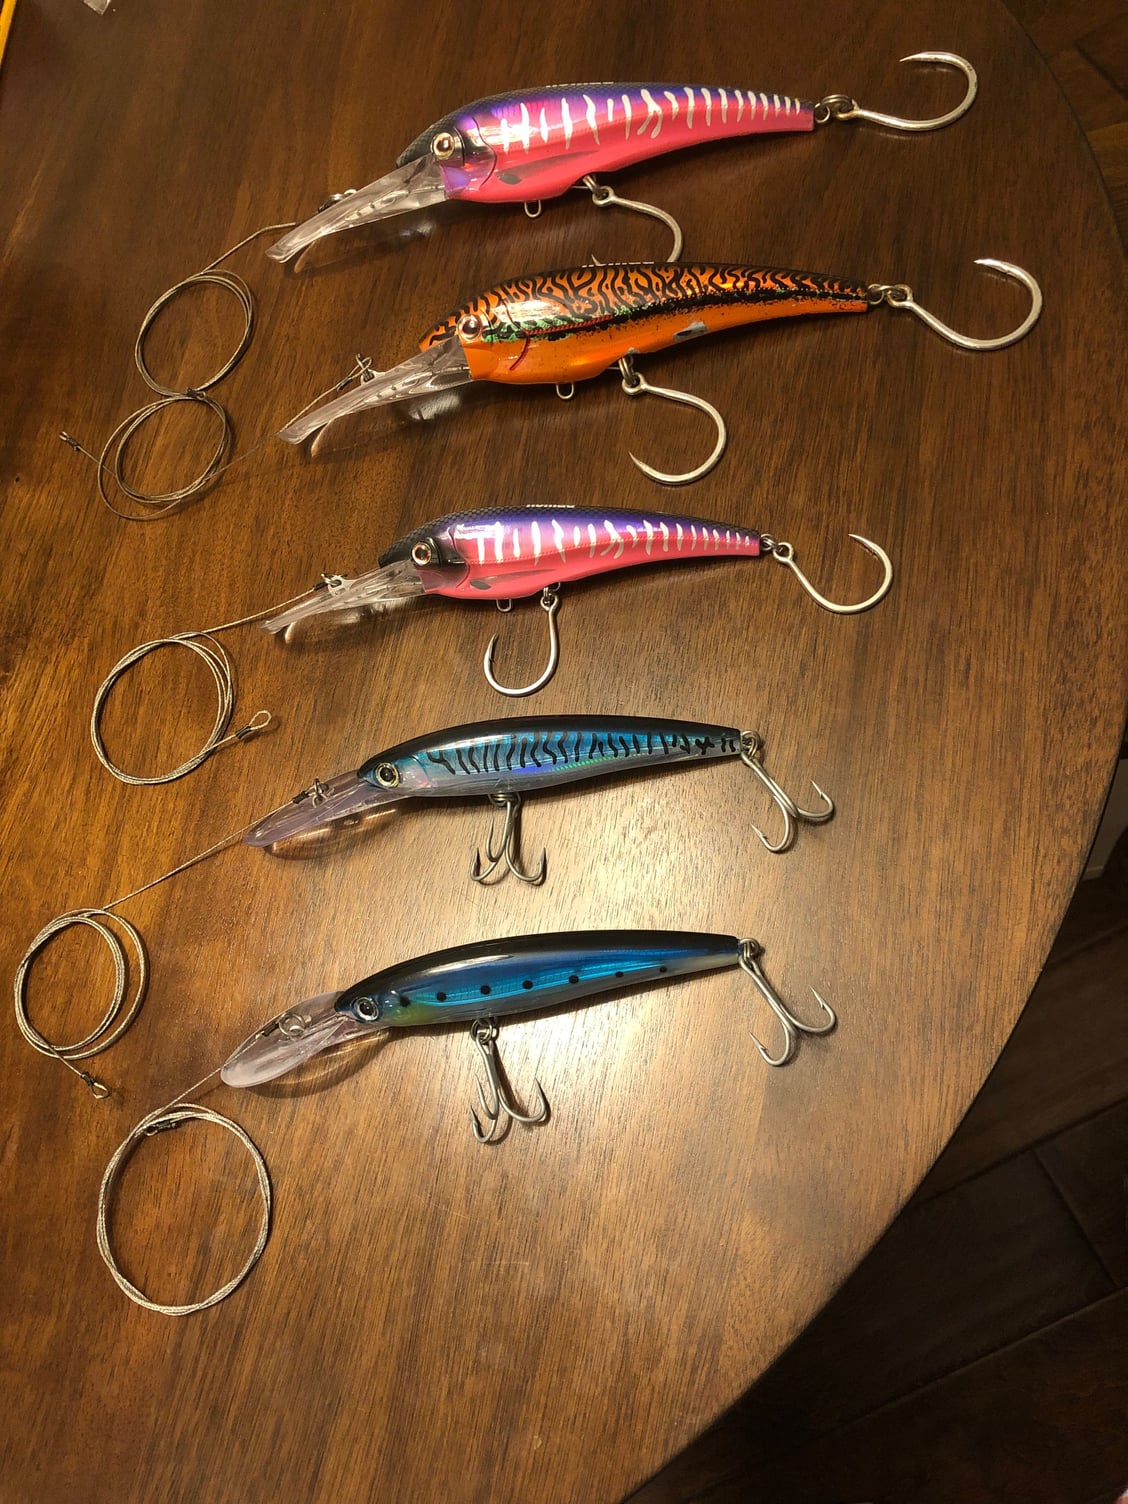 Sold — Nomad and Rapala deep diver trolling plugs - The Hull Truth -  Boating and Fishing Forum